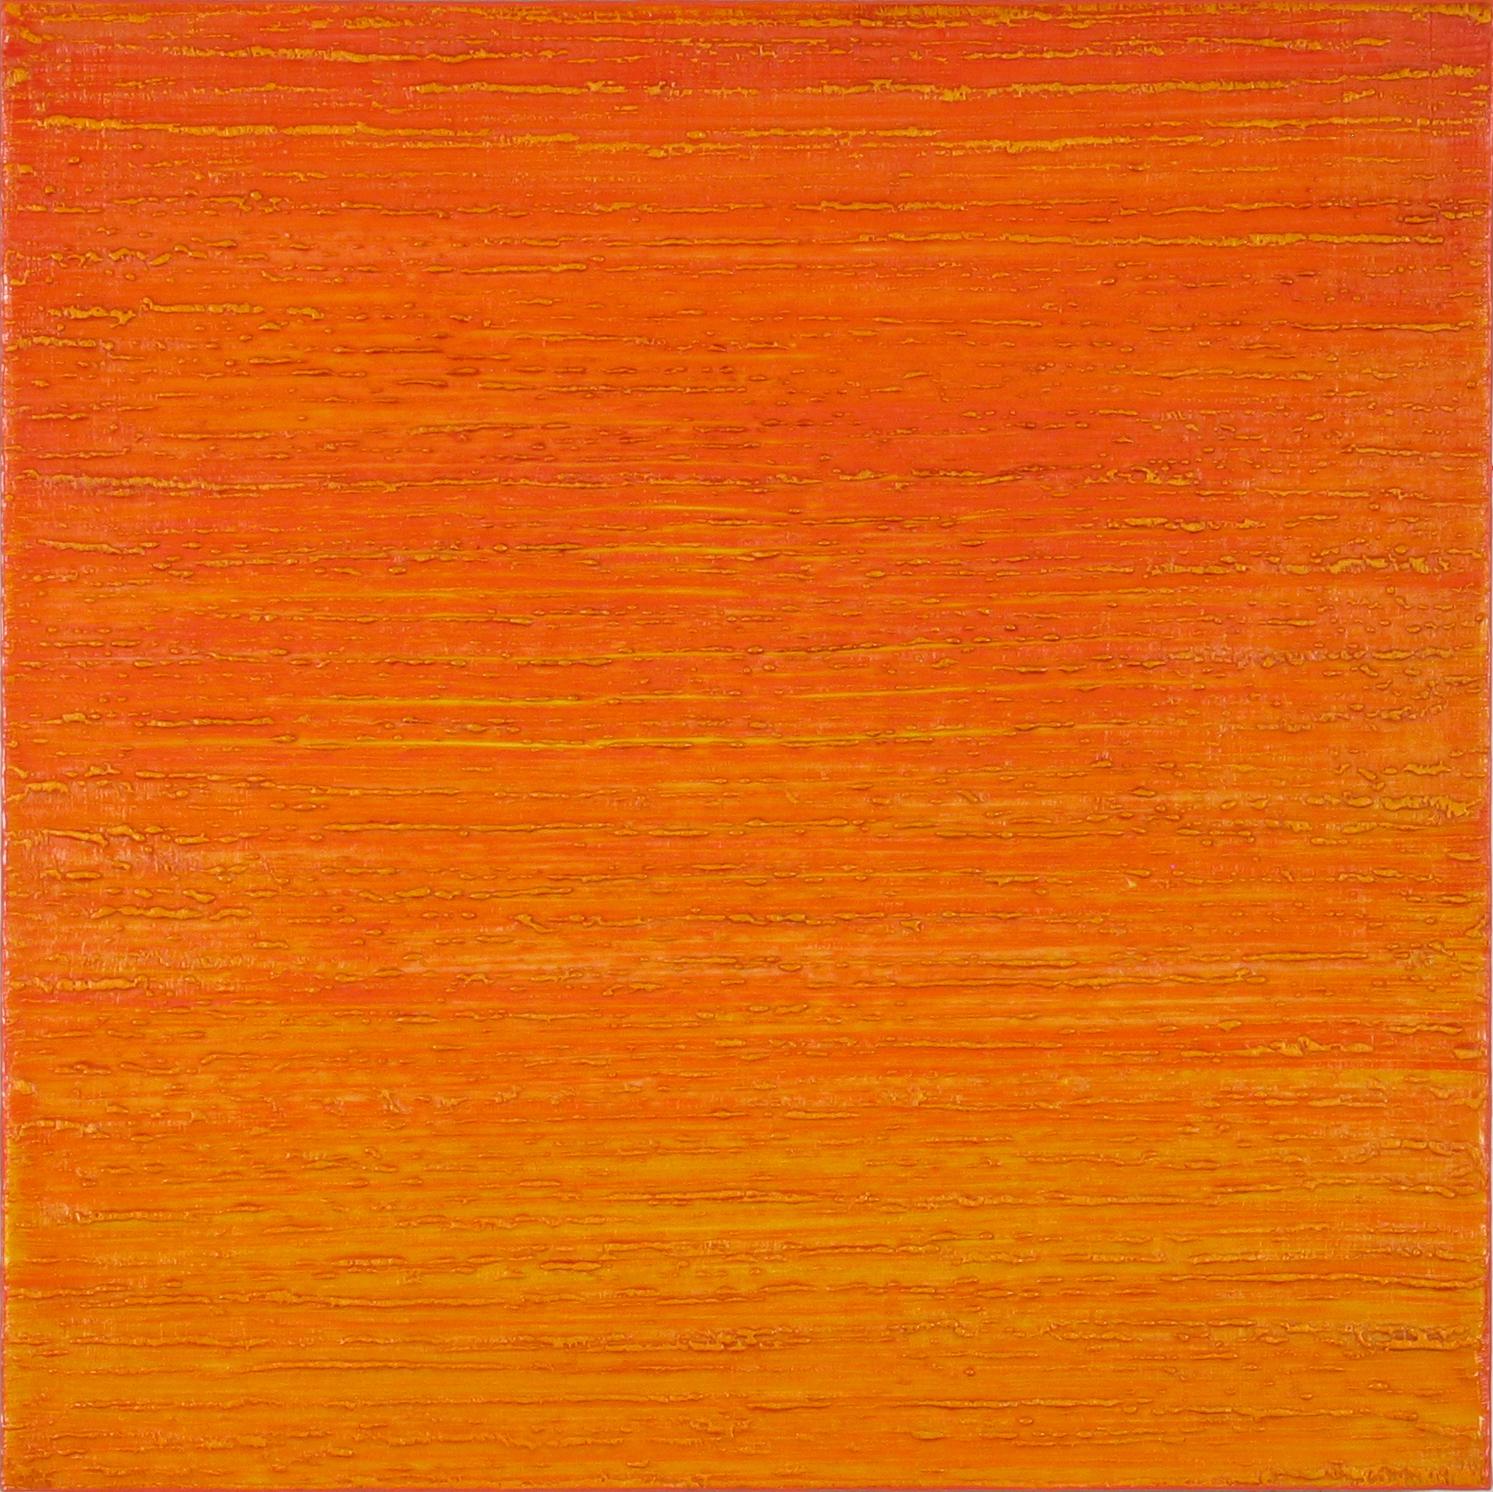 This is a deep, bright orange encaustic (pigmented beeswax) painting on birch panel with coral pink along the edge. Signed, dated and titled on verso.

Joanne Mattera is the foremost expert in the field of encaustic painting and is the founder and